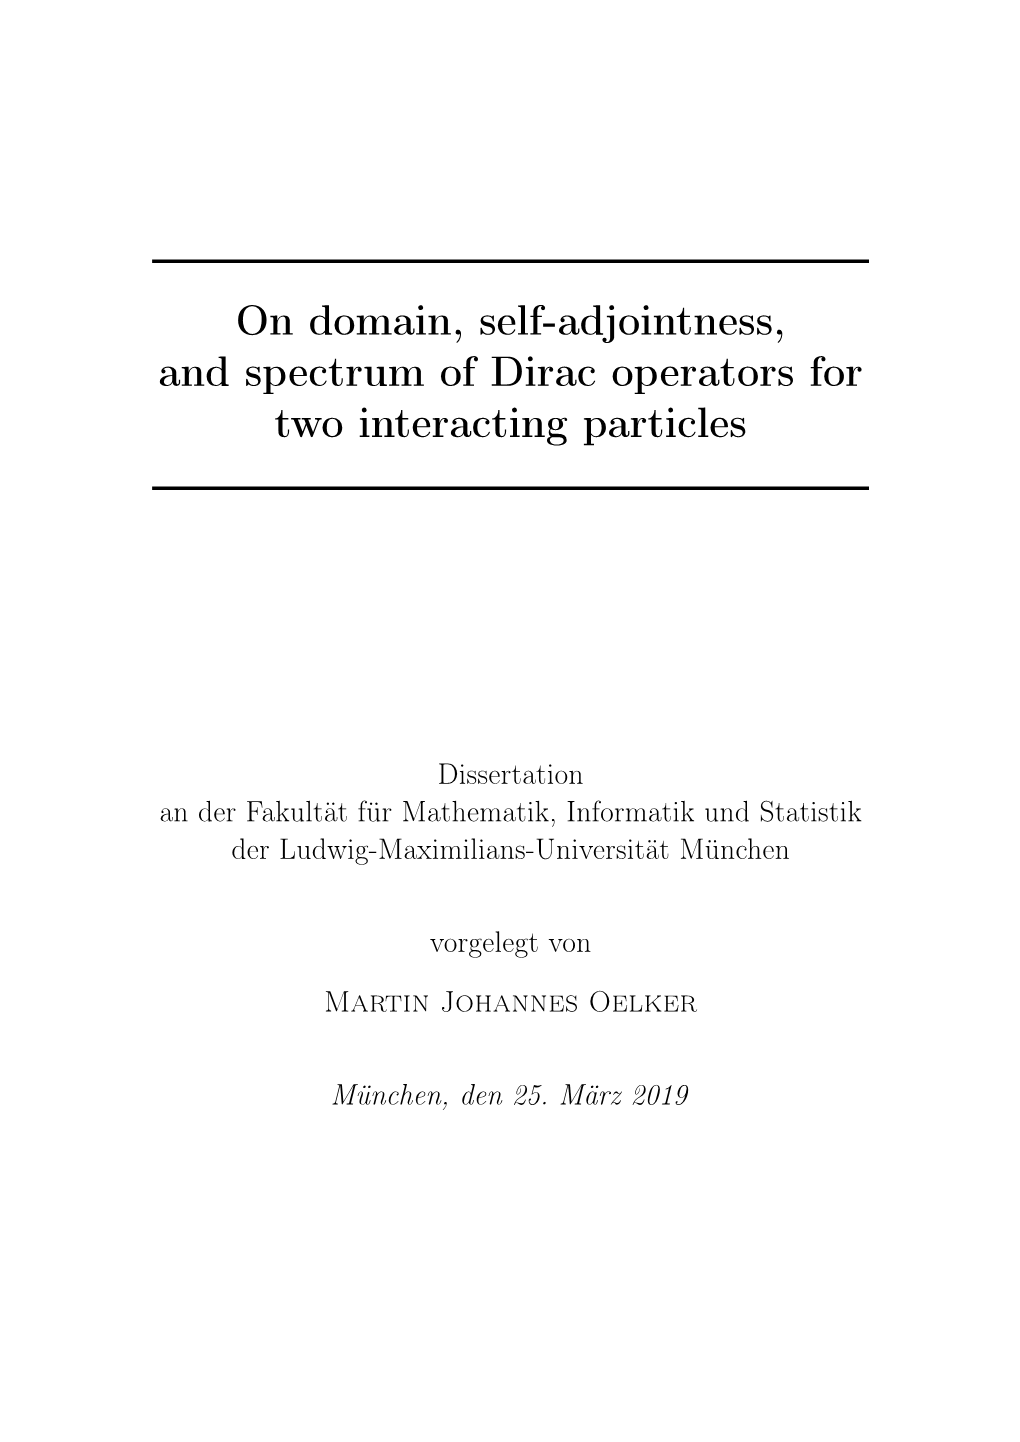 On Domain, Self-Adjointness, and Spectrum of Dirac Operators for Two Interacting Particles